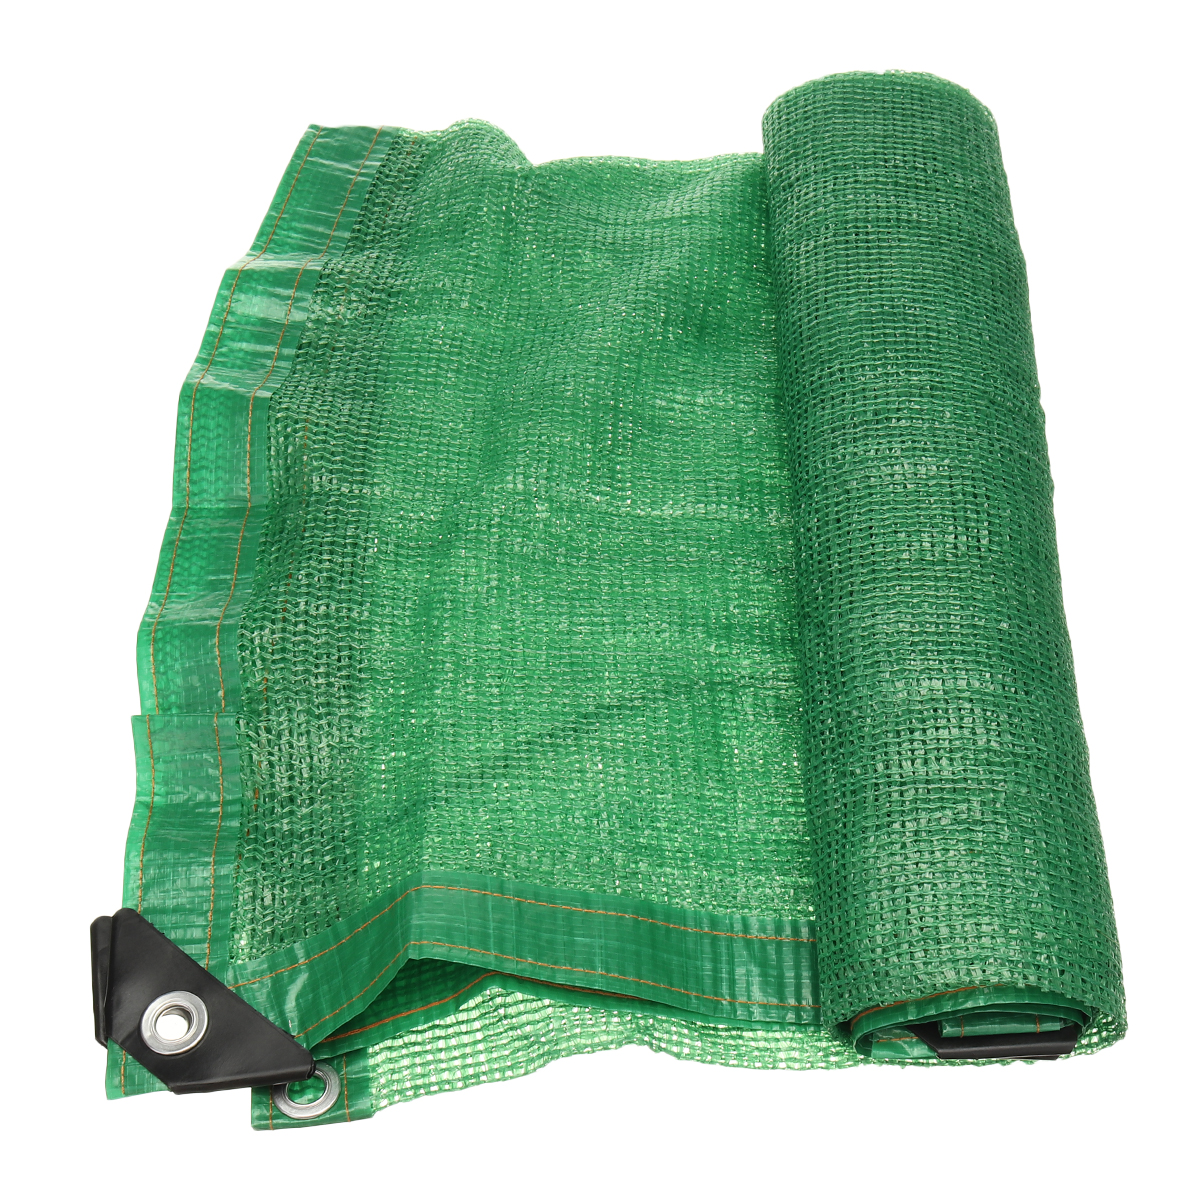 Find Sunshade Net Outdoor Garden Sunscreen Sunblock Shade Cloth Net PER Plant Greenhouse for Sale on Gipsybee.com with cryptocurrencies